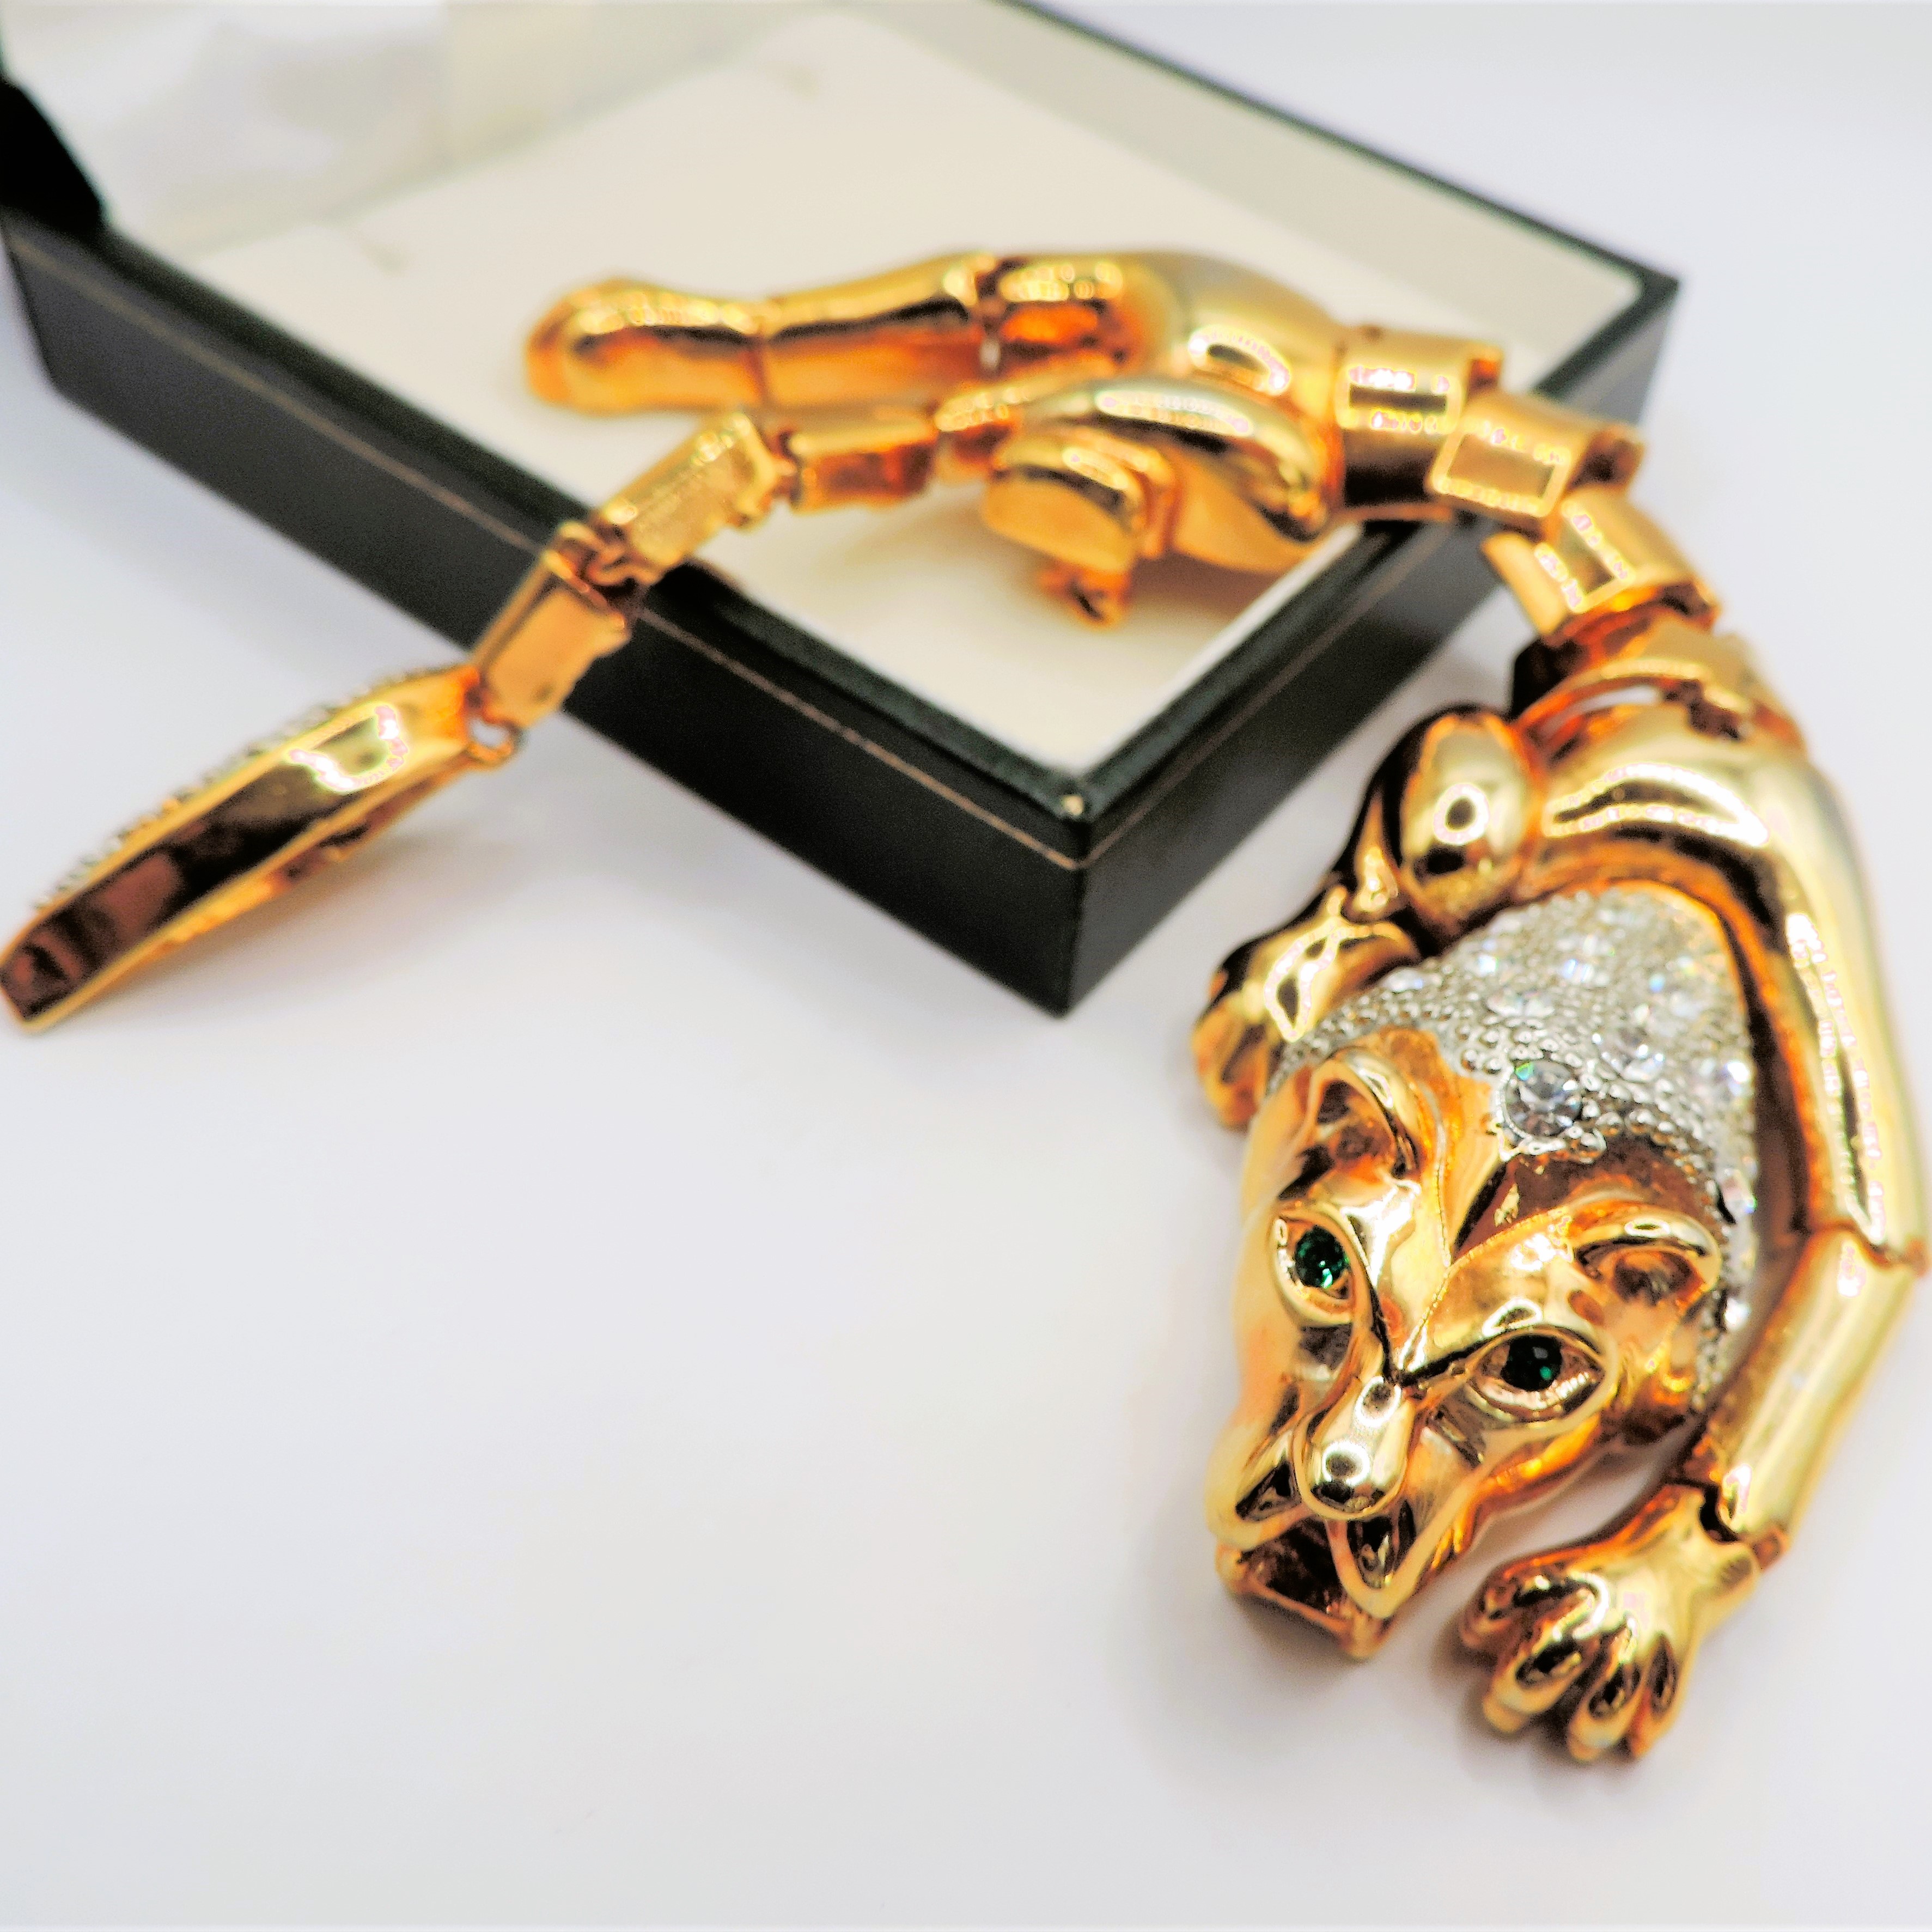 Vintage Gold Plated Crystal Lion Articulated Shoulder Brooch 7 inches Long c. 1980's - Image 6 of 6